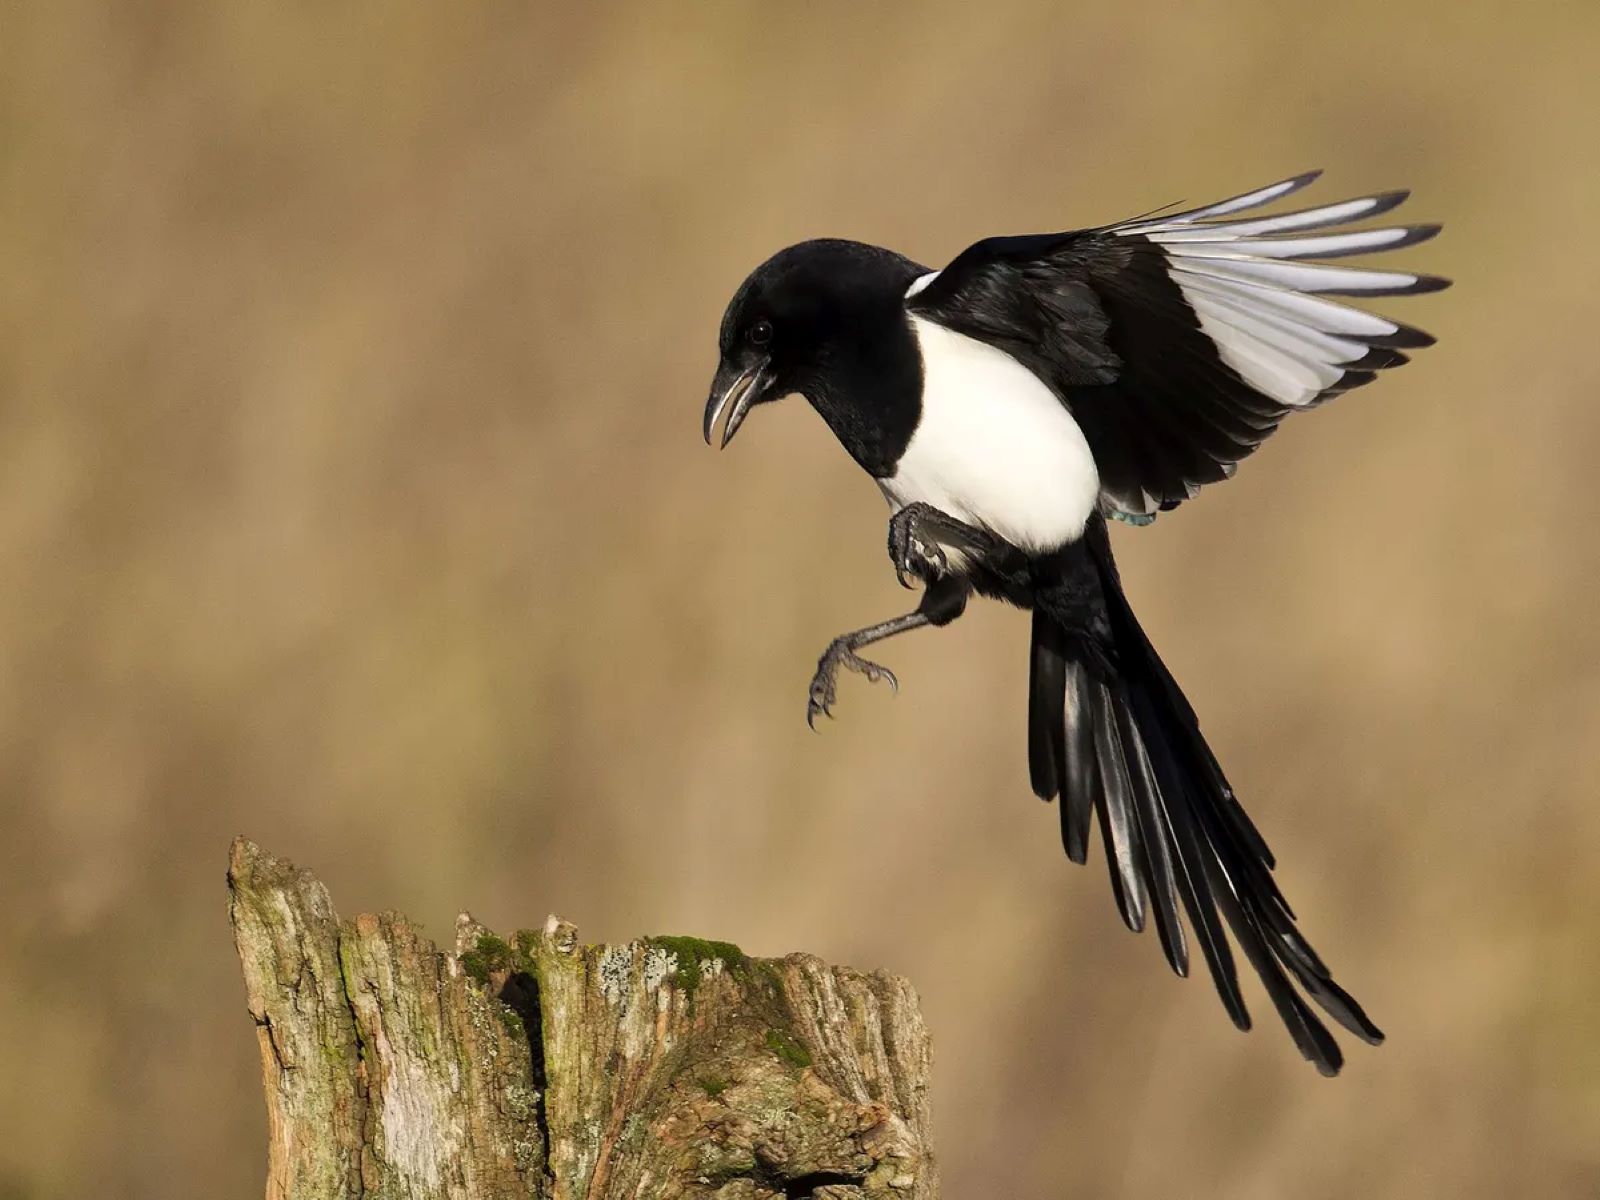 The Surprising Spiritual Meaning Behind Unexpected Magpie Sightings